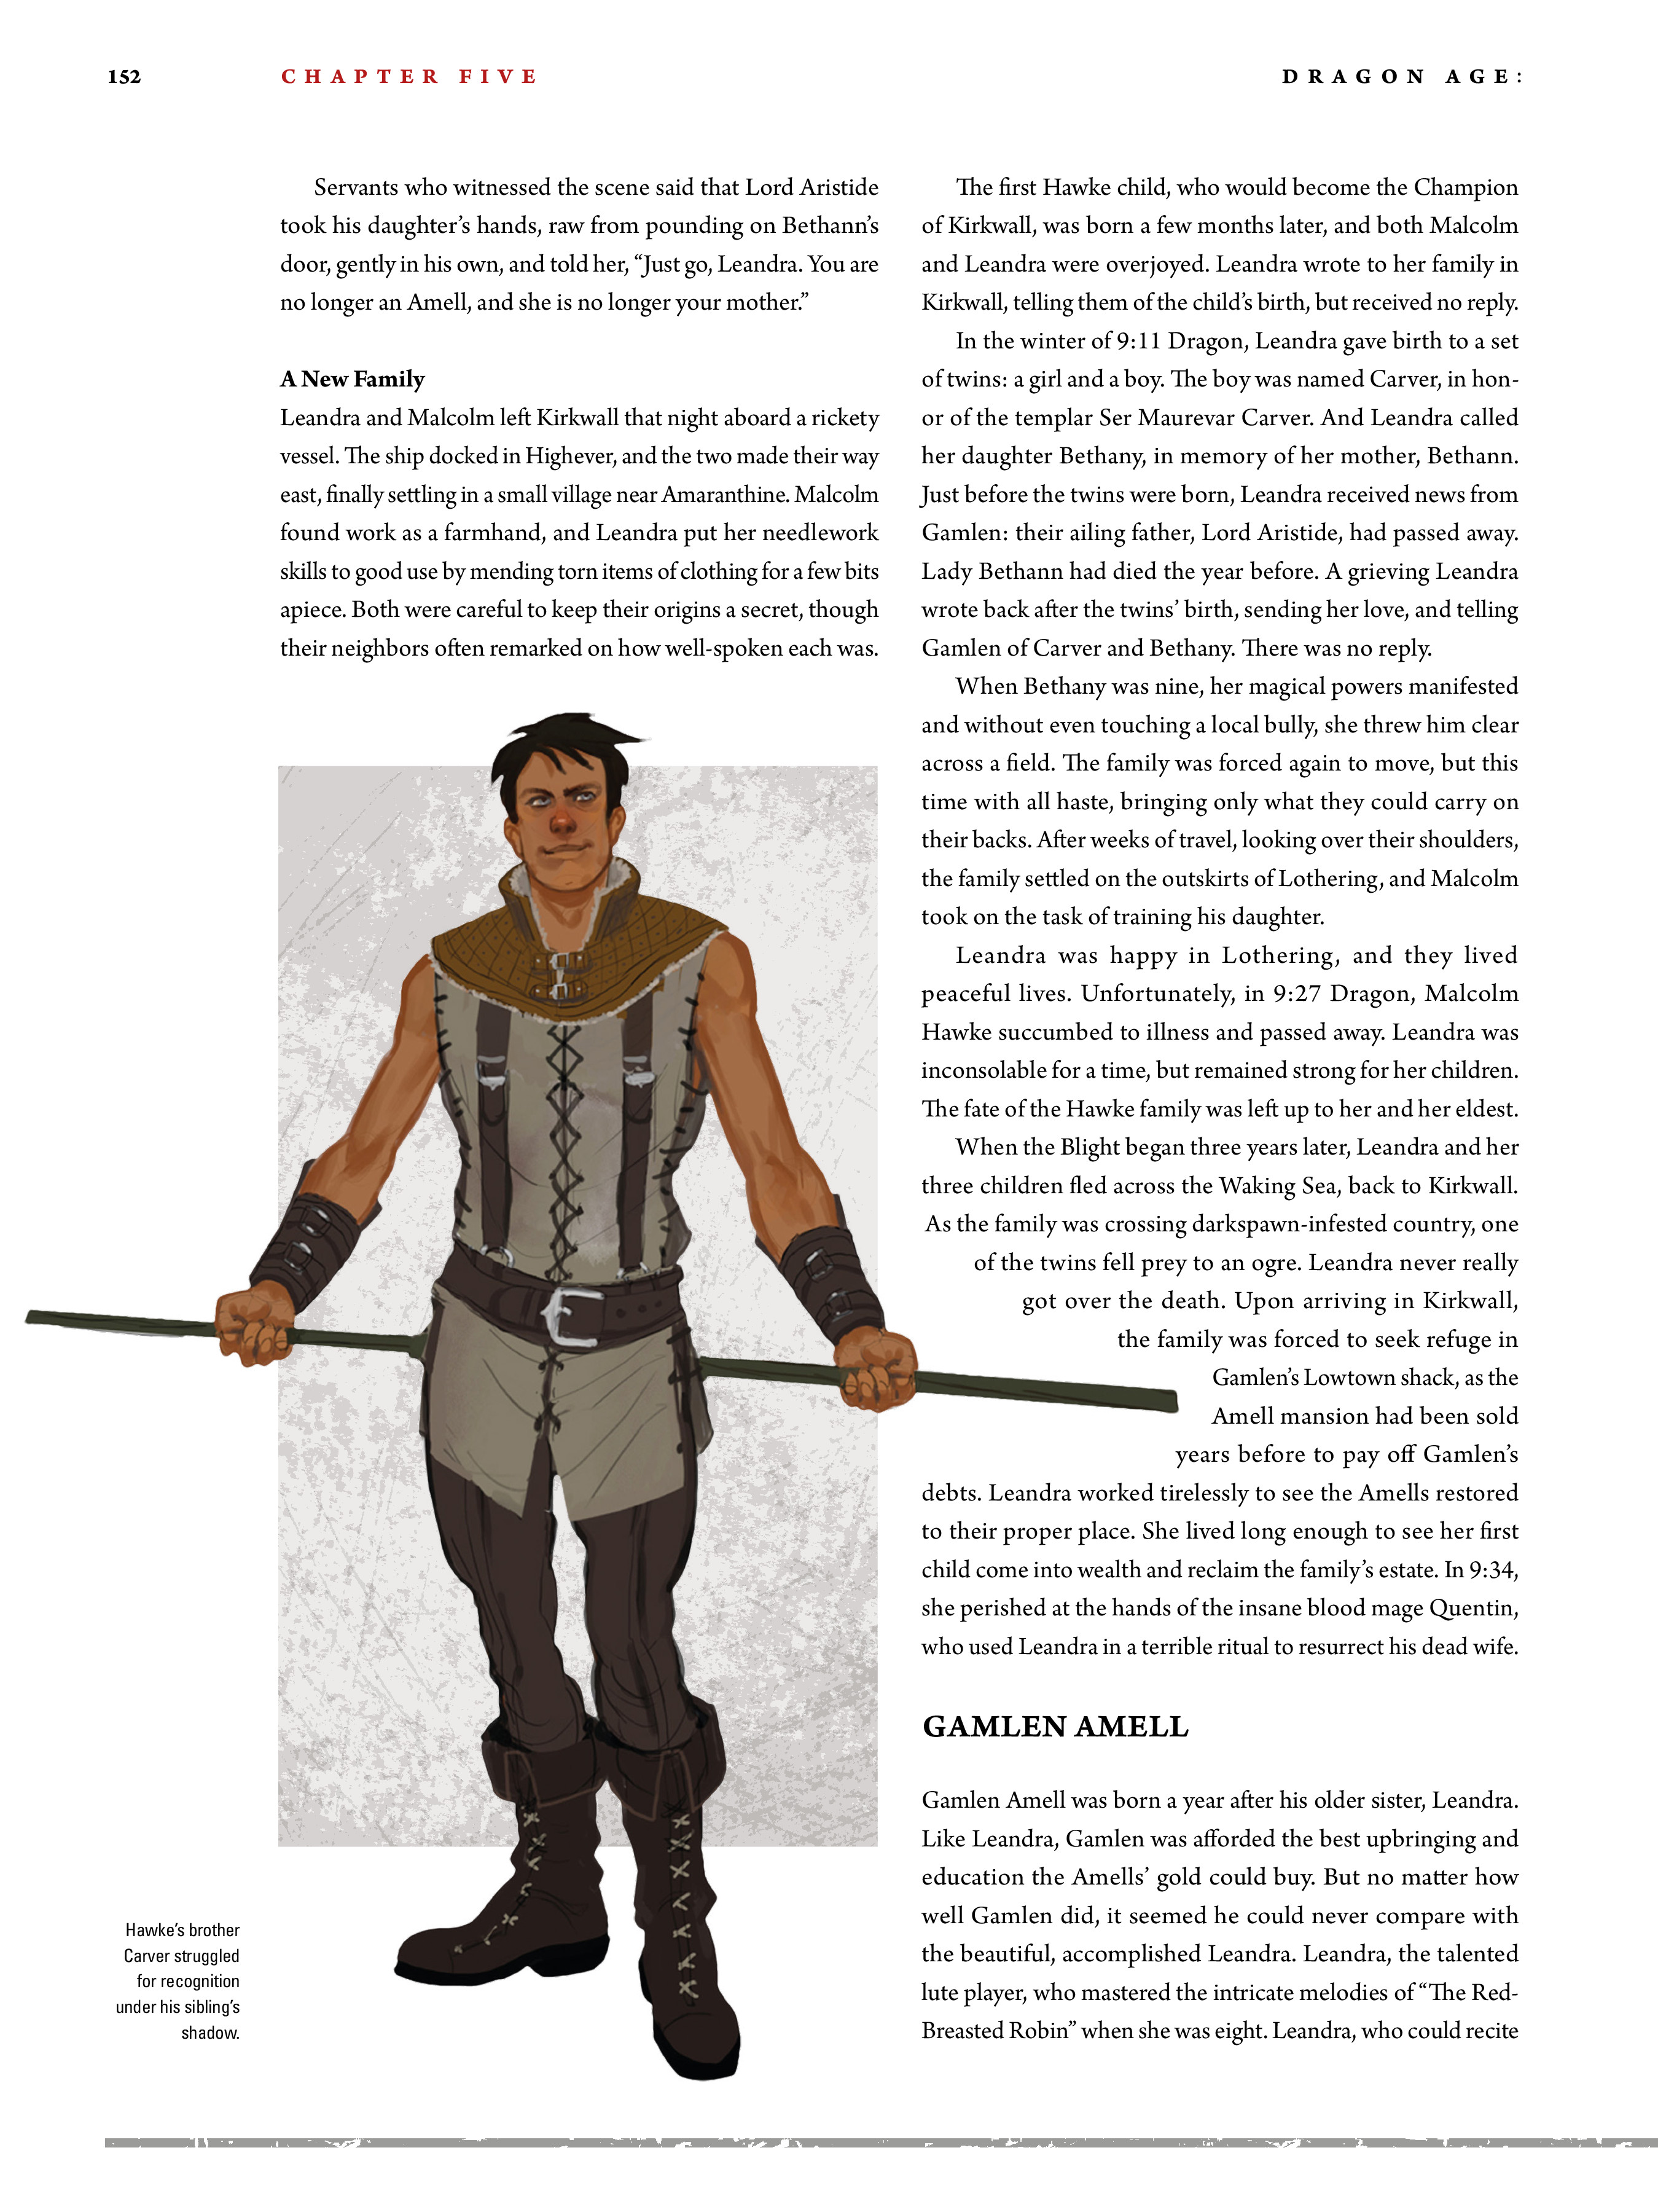 Read online Dragon Age: The World of Thedas comic -  Issue # TPB 2 - 148